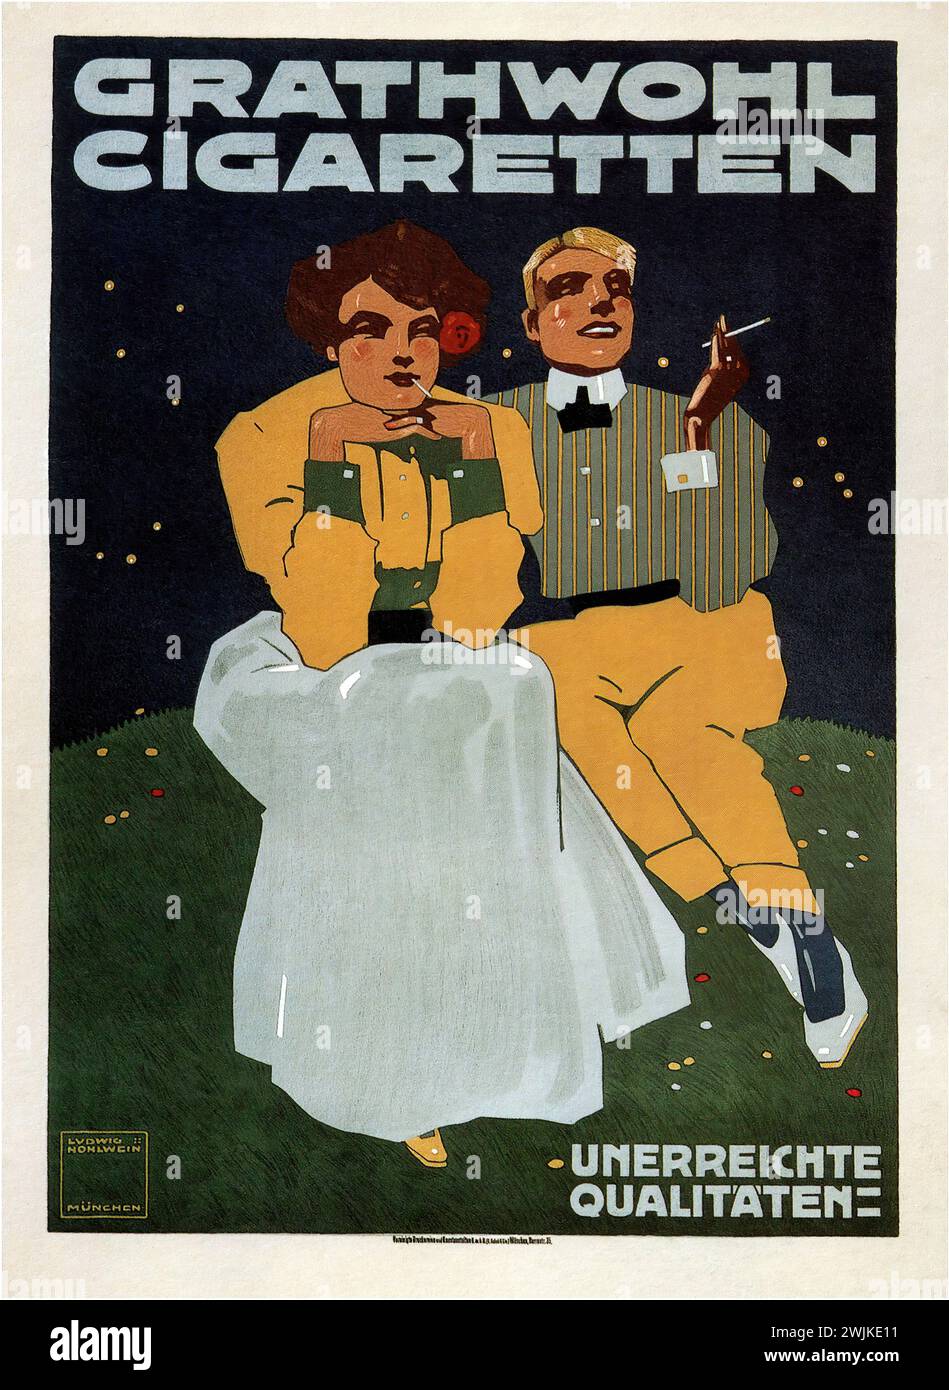 ['Grathwohl Cigaretten Unerreichte Qualitäten'] ['Grathwohl Cigarettes Unmatched Qualities'] Vintage German Advertising depicting a sophisticated couple enjoying cigarettes, with a stylized night scene, utilizing a flat color design and bold typography. Stock Photo